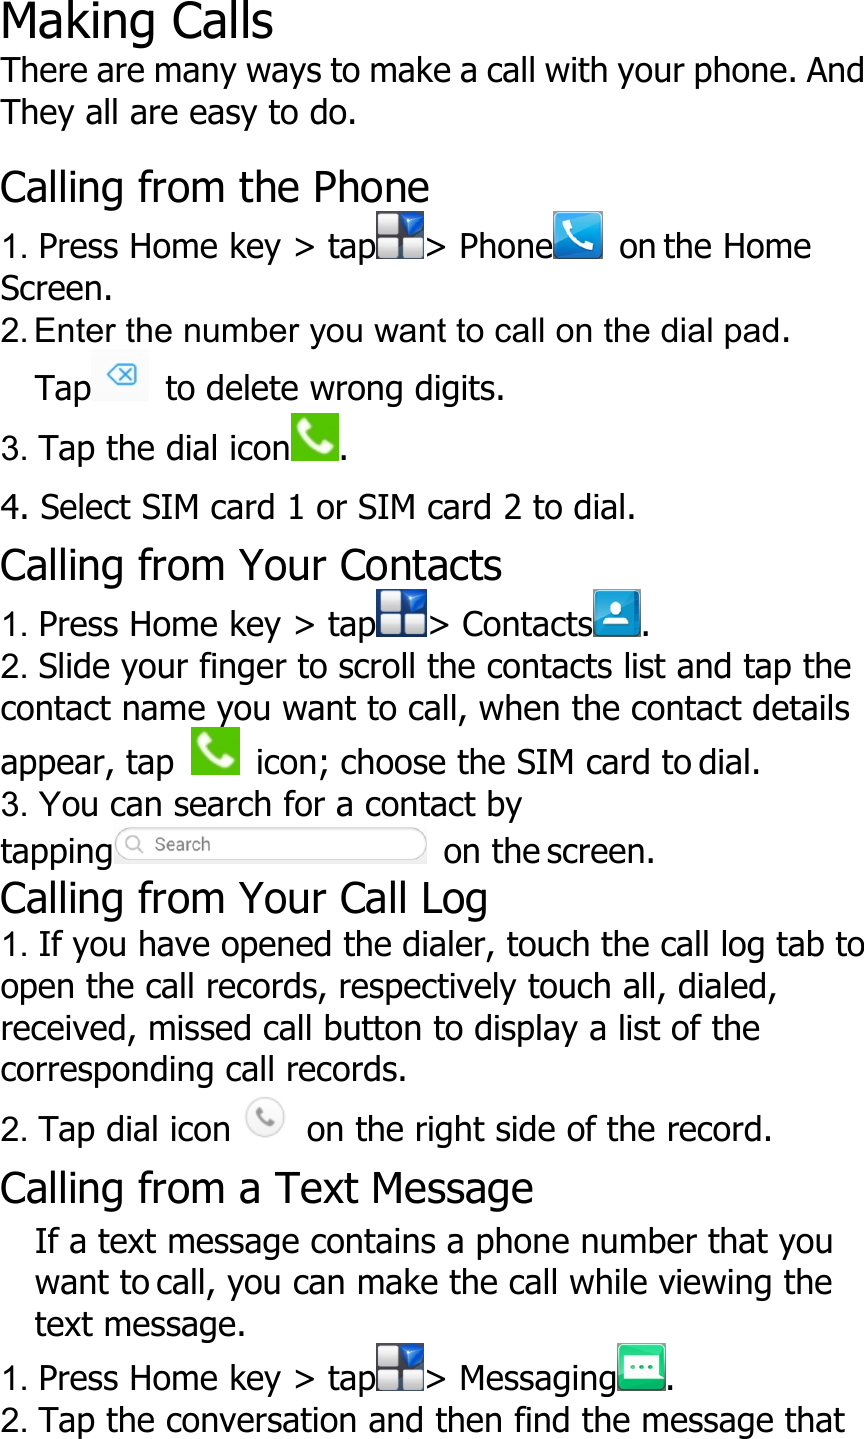 Making CallsThere are many ways to make a call with your phone. AndThey all are easy to do.Calling from the Phone1. Press Home key &gt; tap &gt; Phone on the HomeScreen.2. Enter the number you want to call on the dial pad.Tap to delete wrong digits.3. Tap the dial icon .4. Select SIM card 1 or SIM card 2 to dial.Calling from Your Contacts1. Press Home key &gt; tap &gt; Contacts .2. Slide your finger to scroll the contacts list and tap thecontact name you want to call, when the contact detailsappear, tap icon; choose the SIM card to dial.3. You can search for a contact bytapping on the screen.Calling from Your Call Log1. If you have opened the dialer, touch the call log tab toopen the call records, respectively touch all, dialed,received, missed call button to display a list of thecorresponding call records.2. Tap dial icon on the right side of the record.Calling from a Text MessageIf a text message contains a phone number that youwant to call, you can make the call while viewing thetext message.1. Press Home key &gt; tap &gt; Messaging .2. Tap the conversation and then find the message that